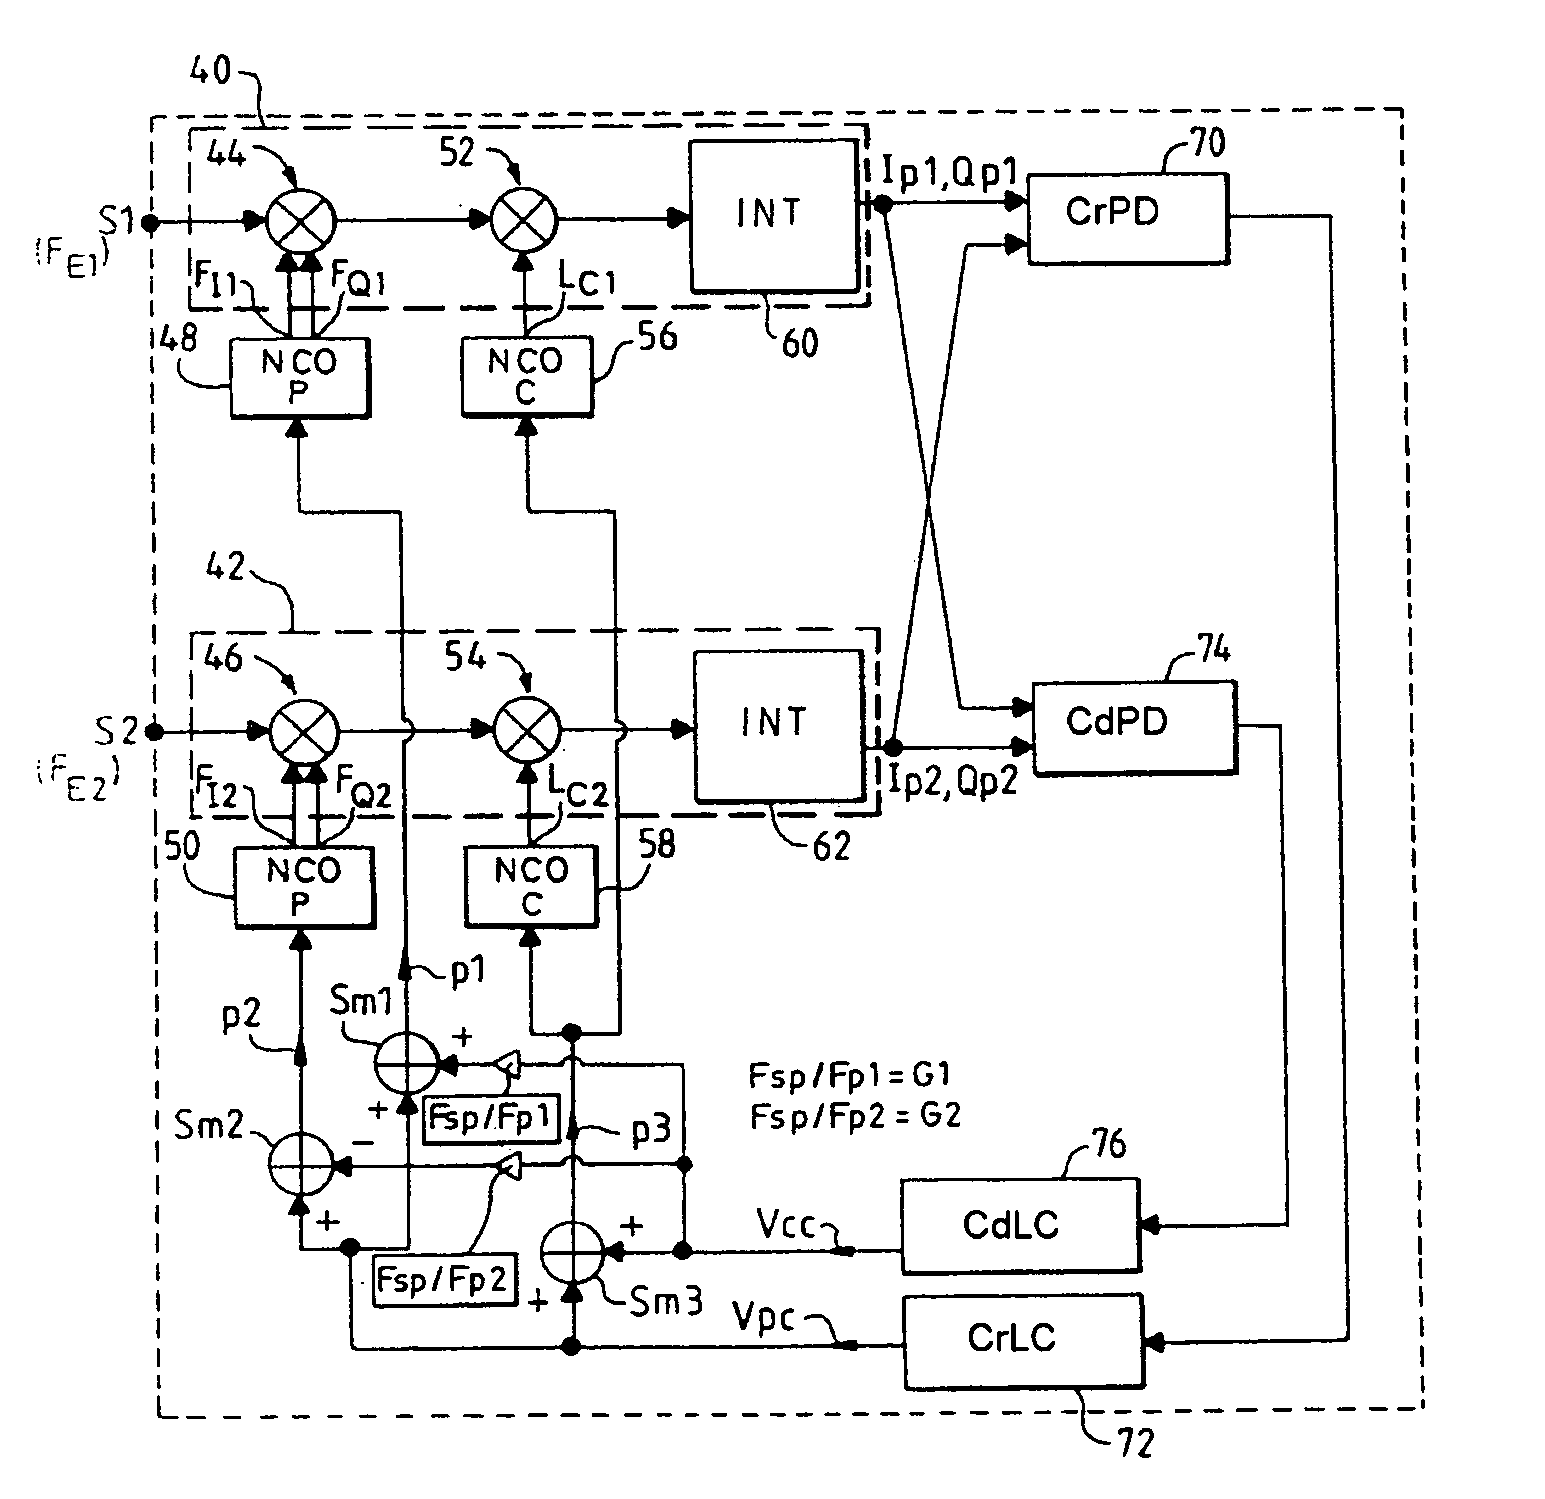 Satellite positioning receiver using two signal carriers